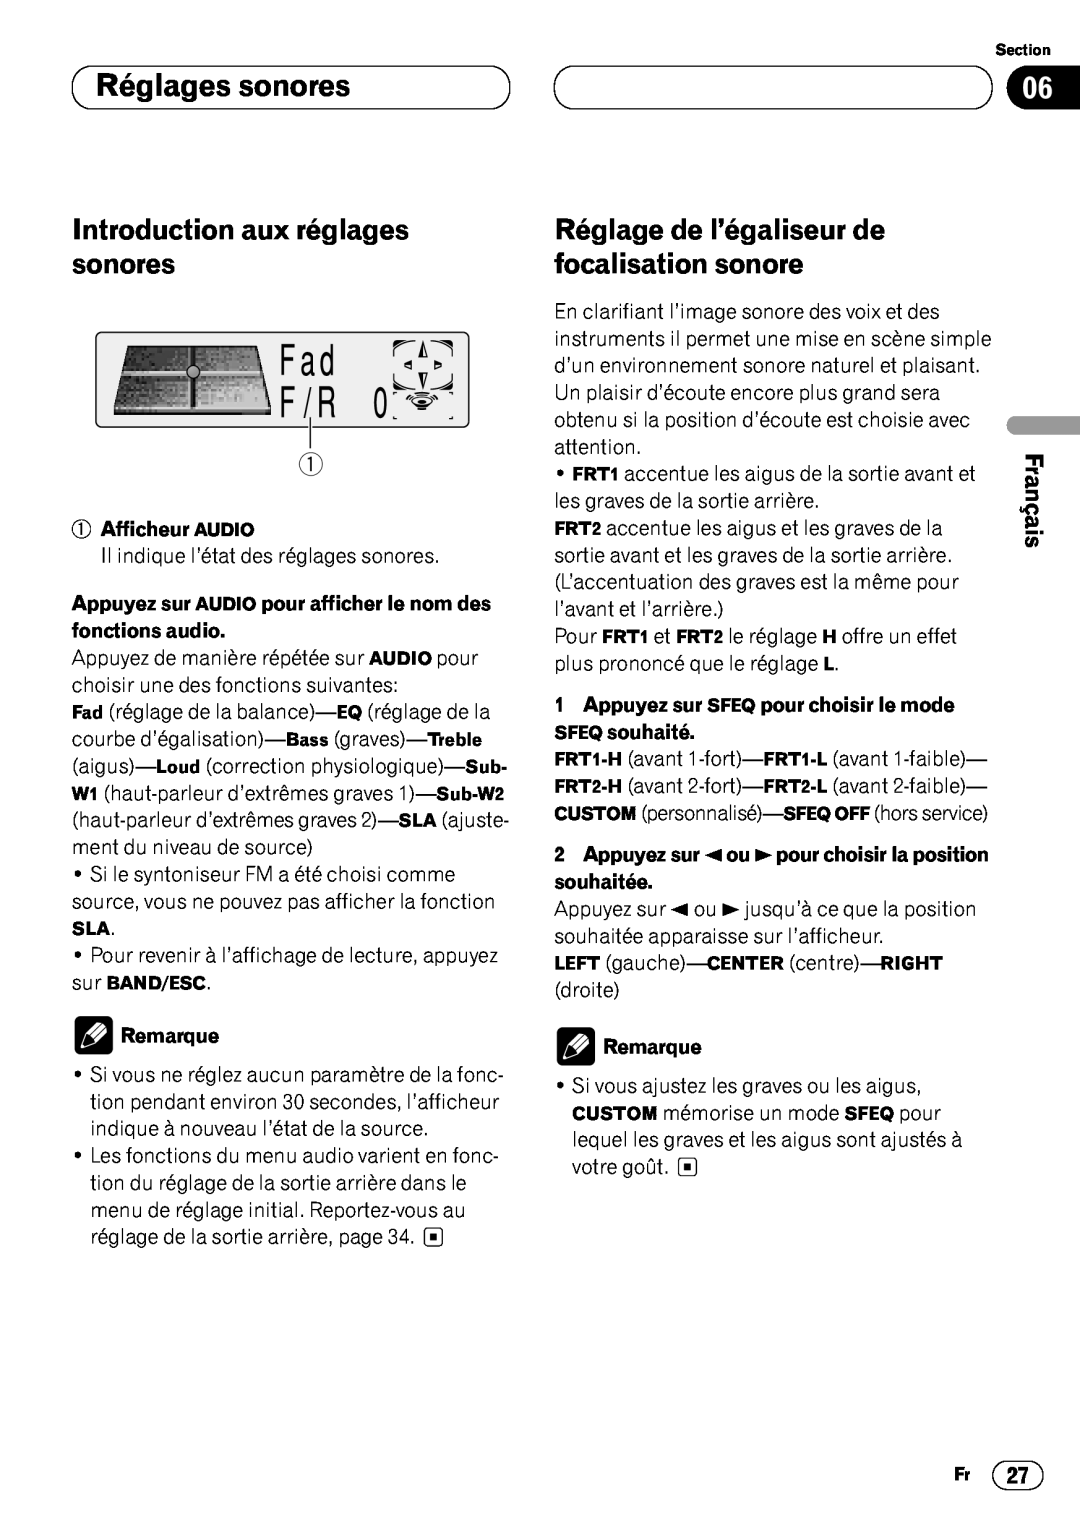 Pioneer DEH-P6400 Réglages sonores06, Introduction aux réglages sonores, Réglage de l’égaliseur de focalisation sonore 